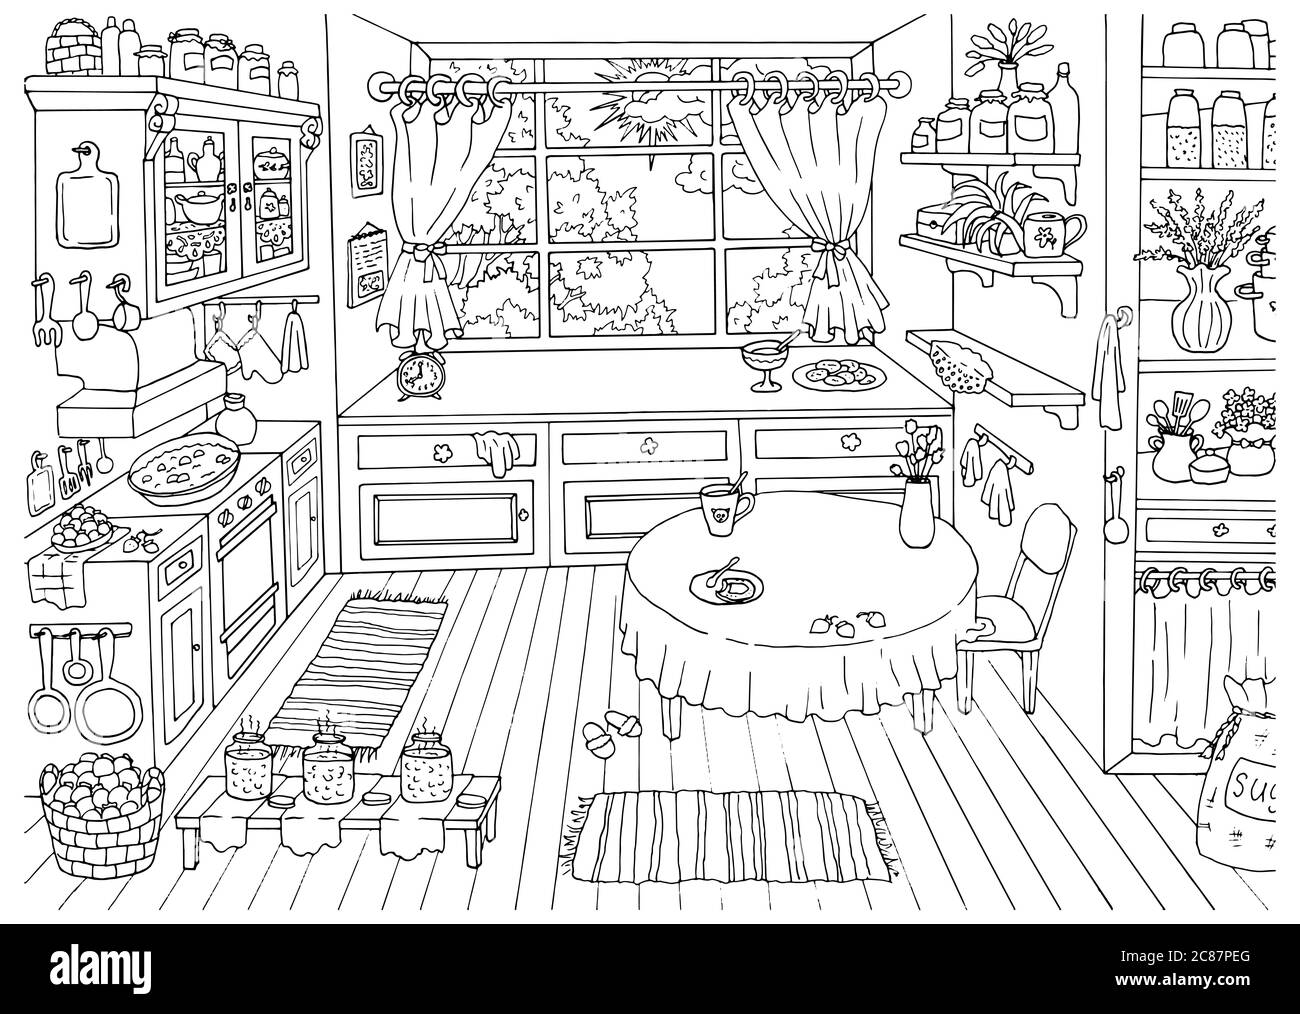 https://c8.alamy.com/comp/2C87PEG/cute-hand-drawn-vector-illustration-of-vintage-country-style-kitchen-with-nobody-funny-scene-creator-graphic-vintage-background-line-art-drawing-fo-2C87PEG.jpg